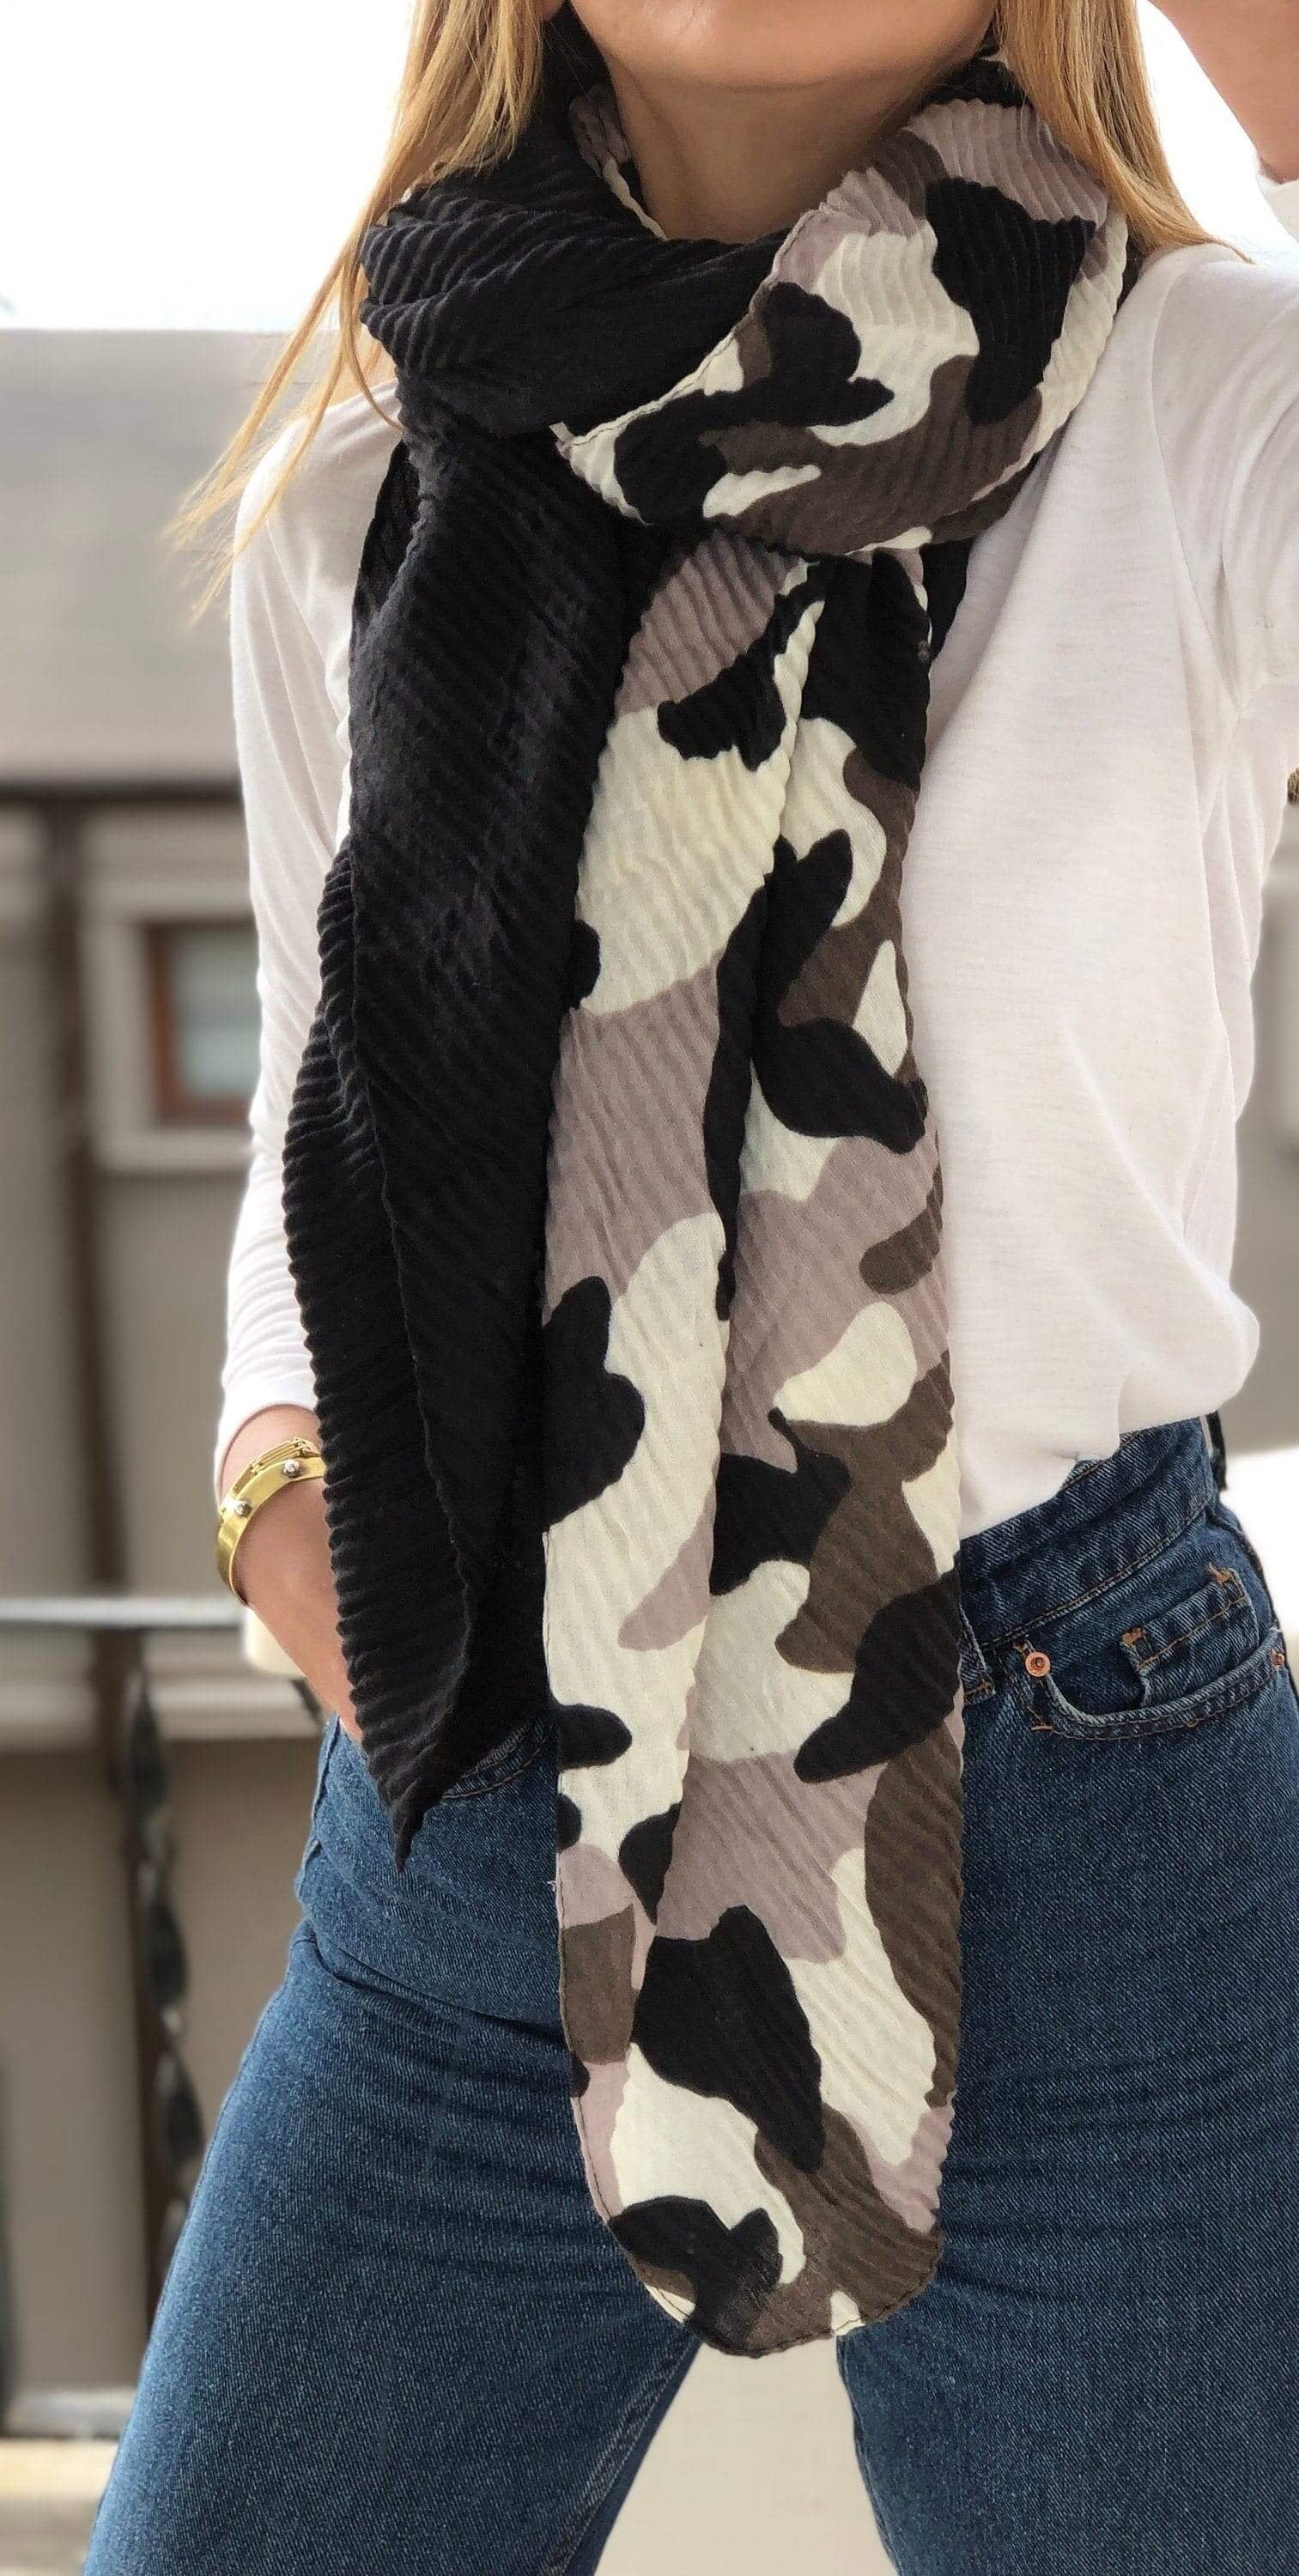 Stay warm in style with this grey, black and white camouflage patterned scarf for women.